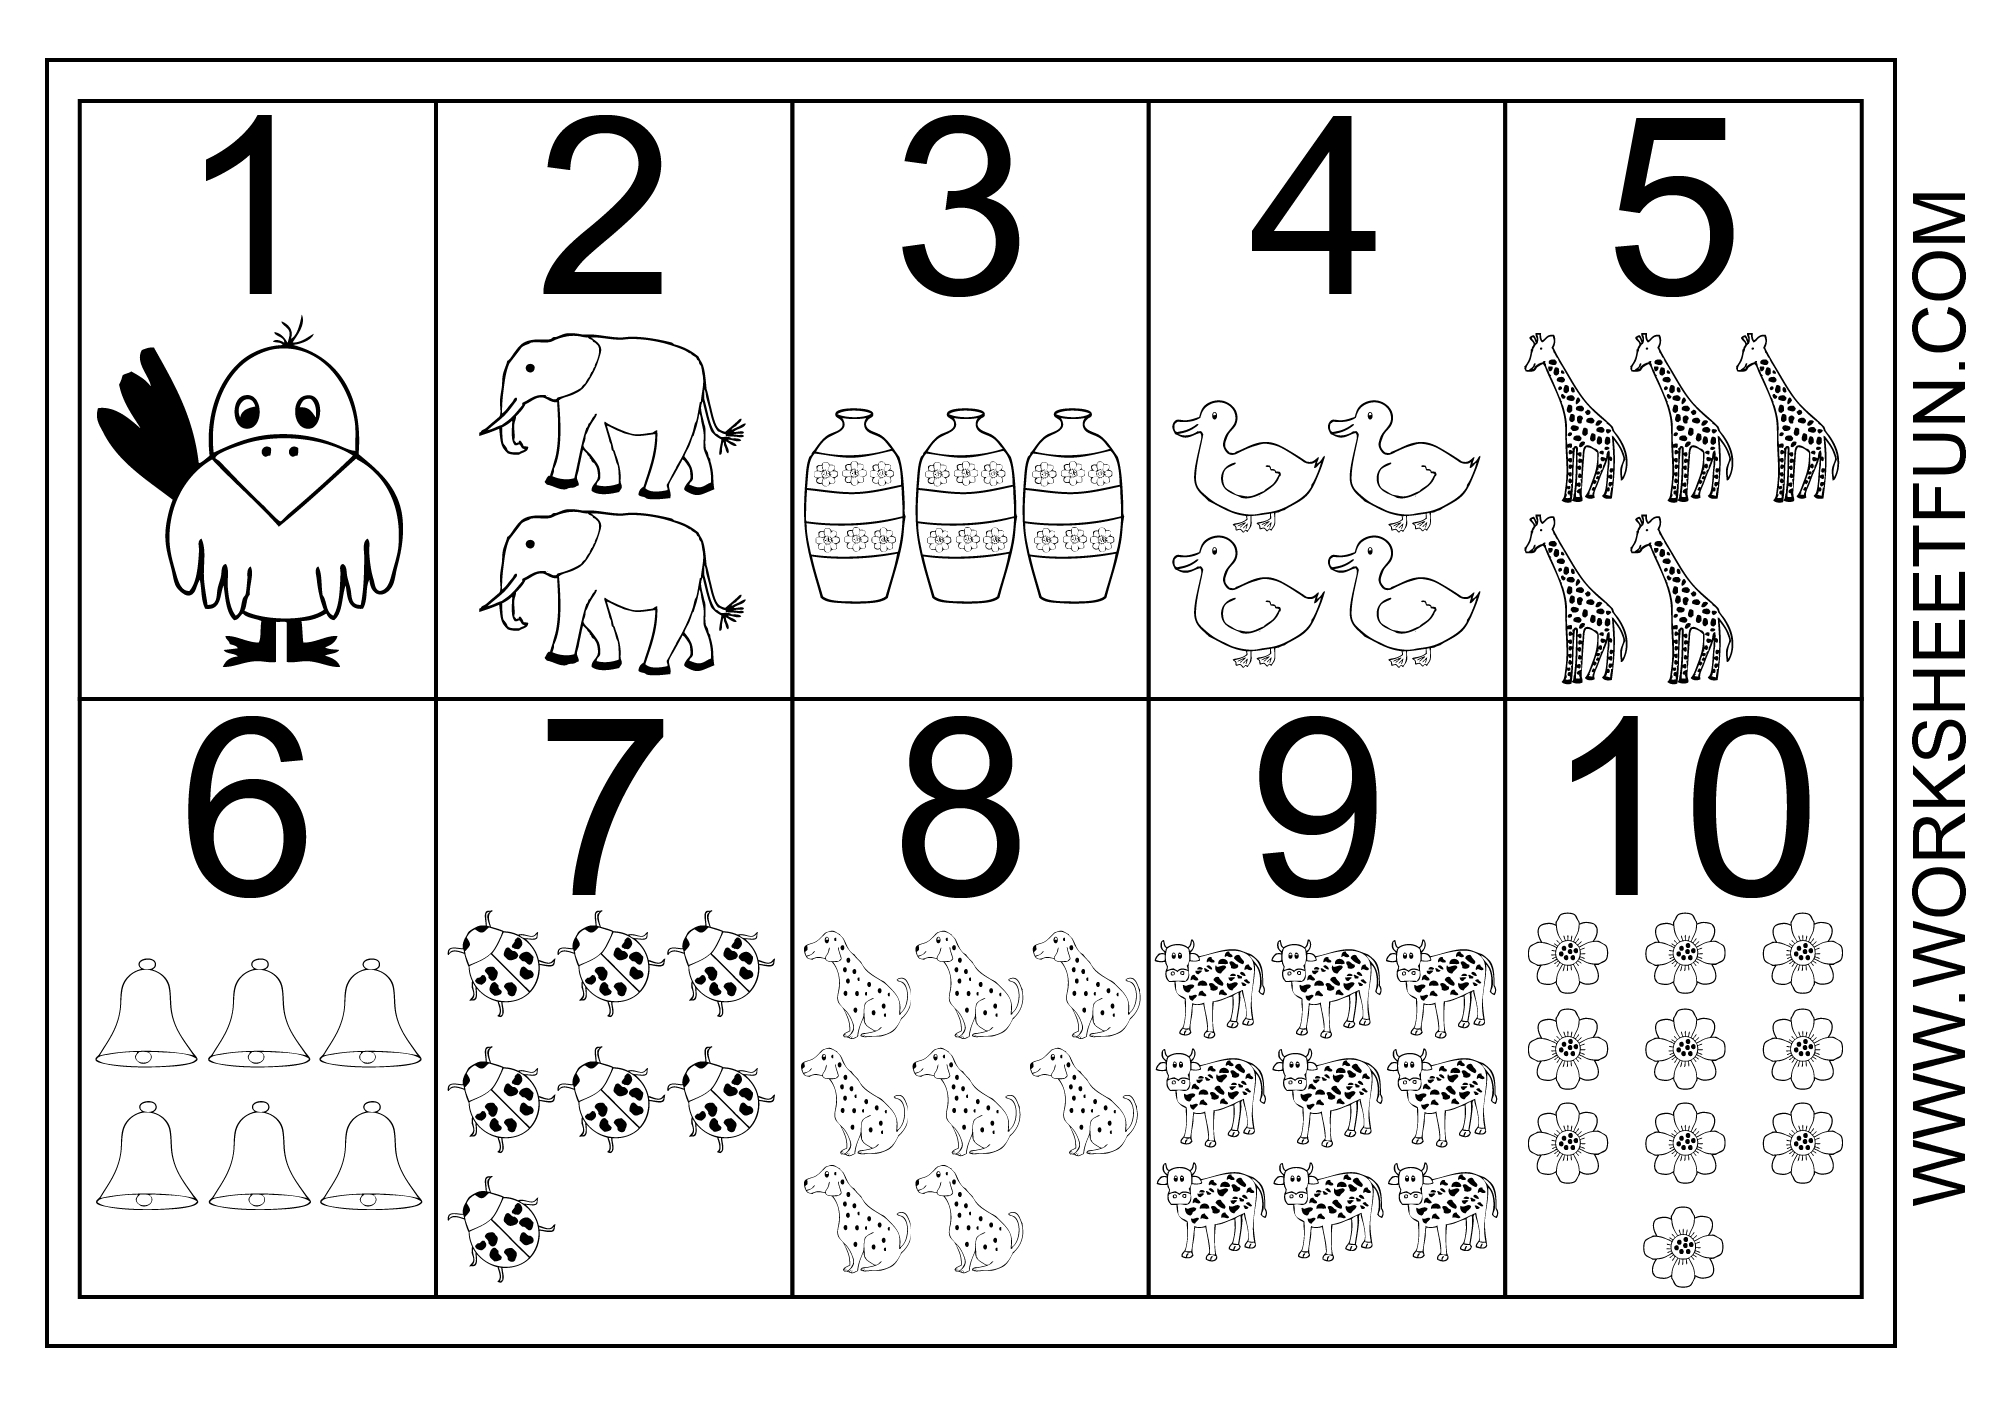 Picture Number Chart 1-10 | Printable Worksheets | Numbers Preschool | Printable Worksheets For Preschoolers On Numbers 1 10